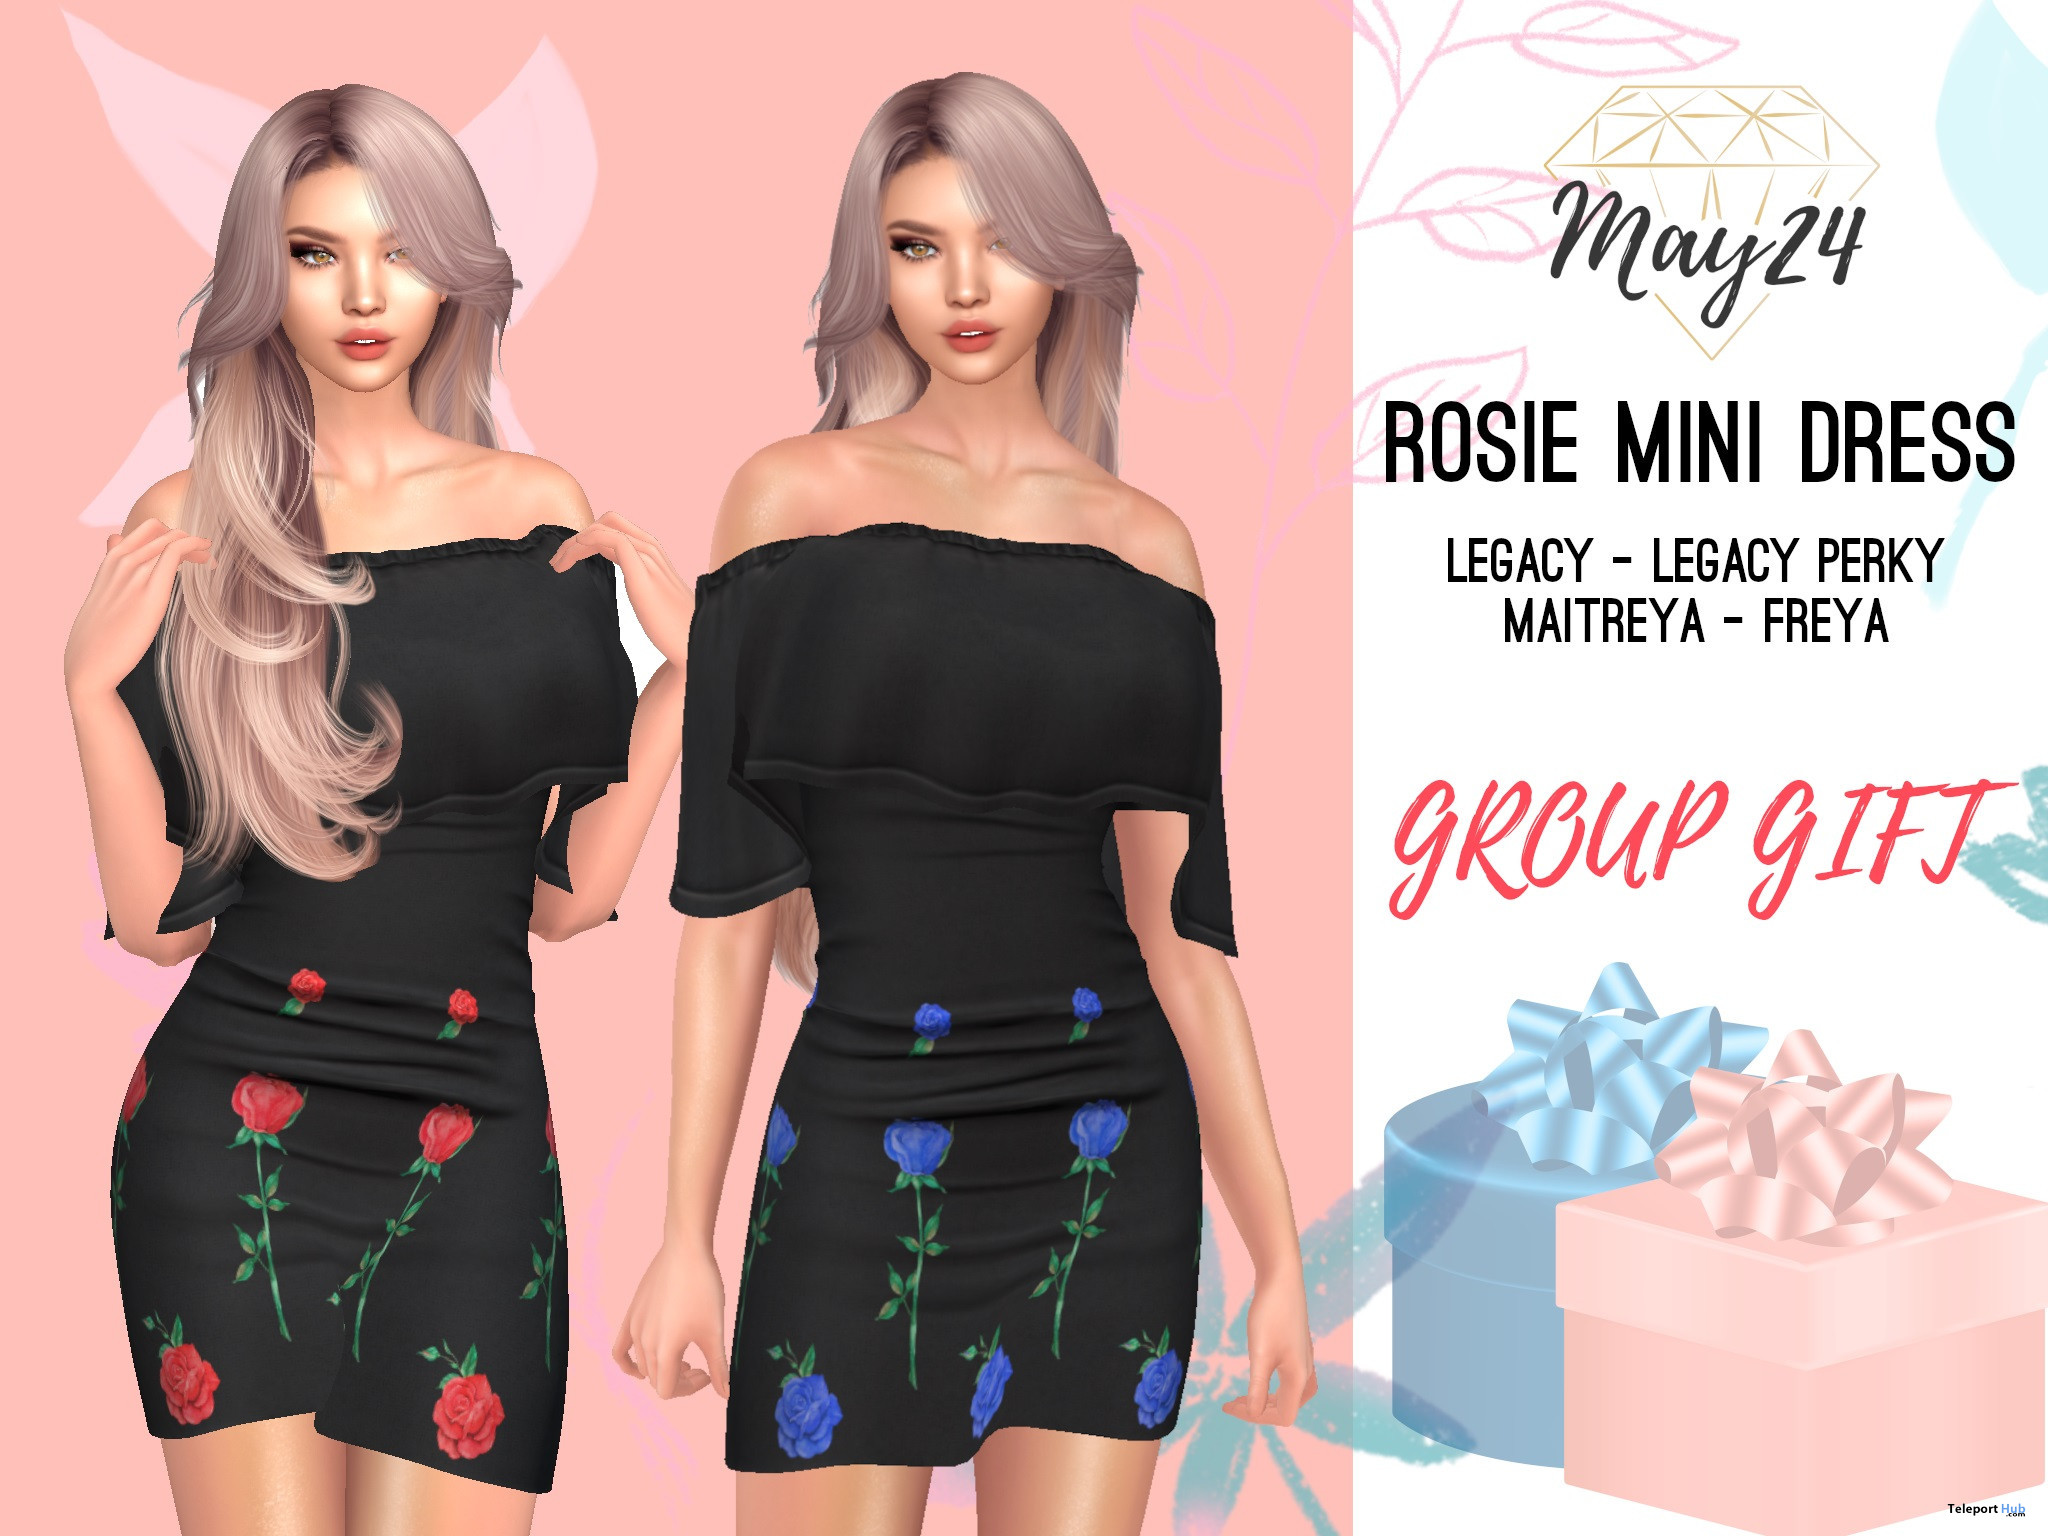 Rosie Mini Dress April 2022 Group Gift by May24 - Teleport Hub - teleporthub.com